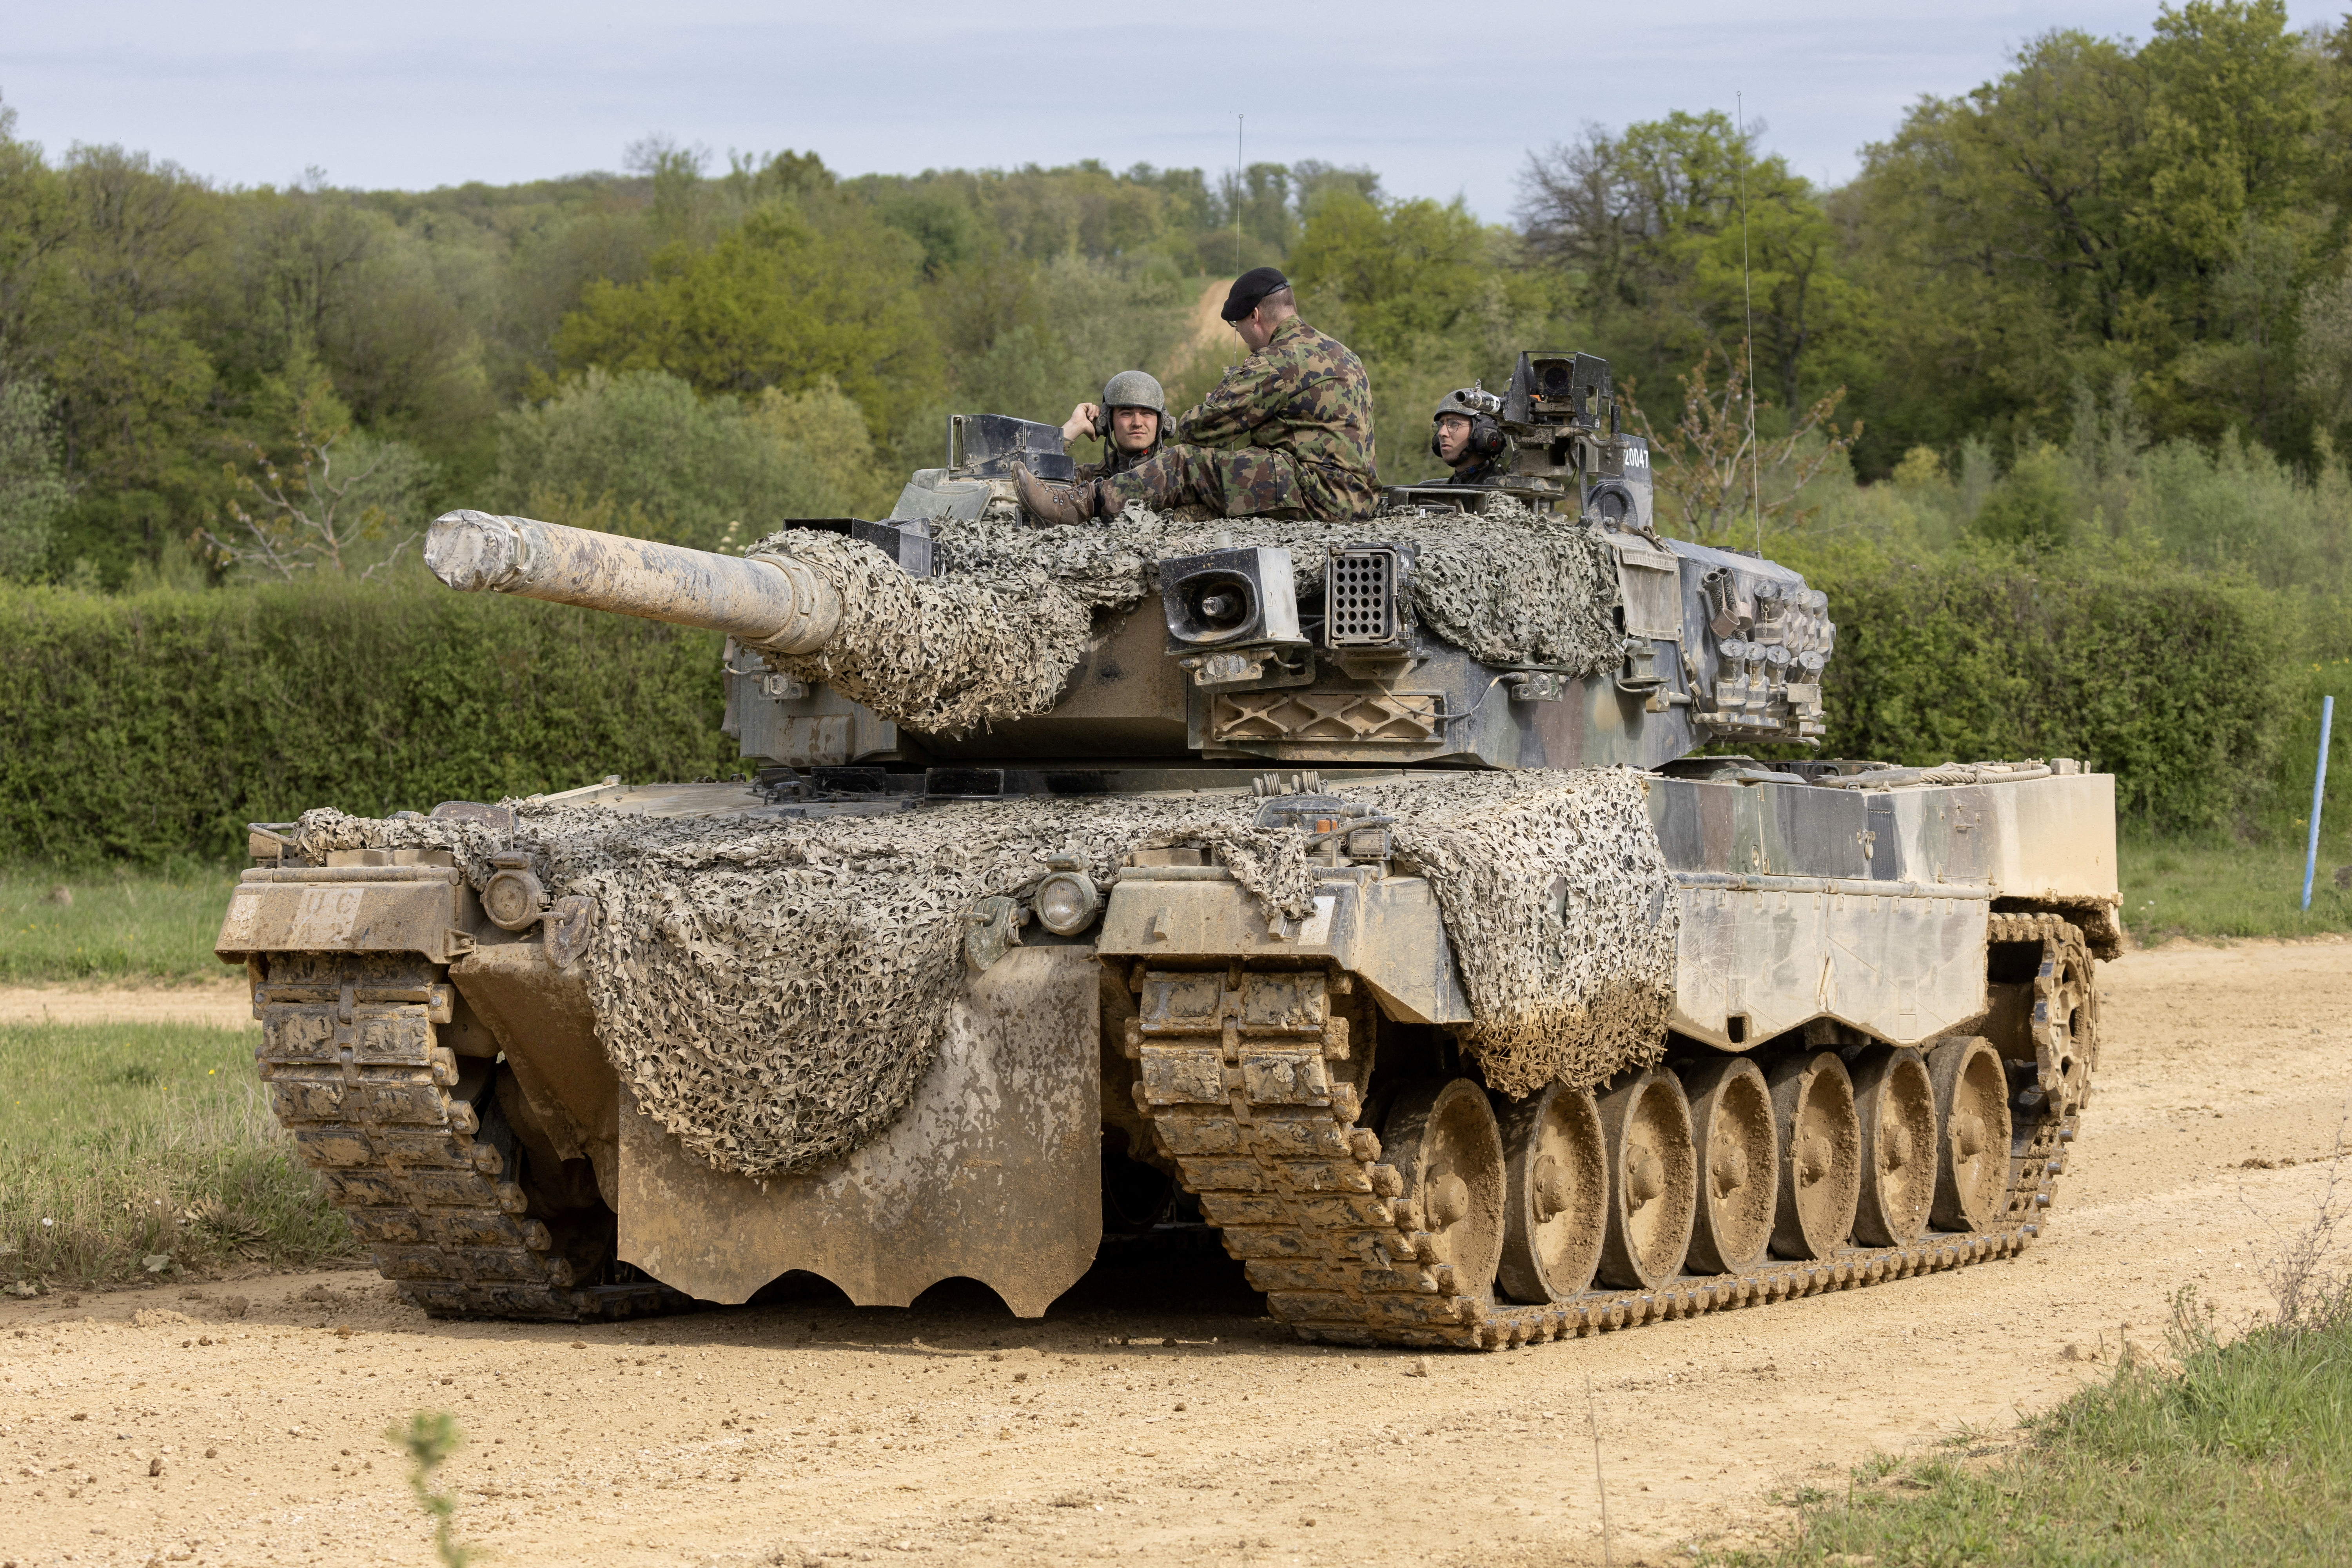 Recruits of the Swiss army Tank School 21 perform an attack exercise with the Leopard 2 tank in Bure